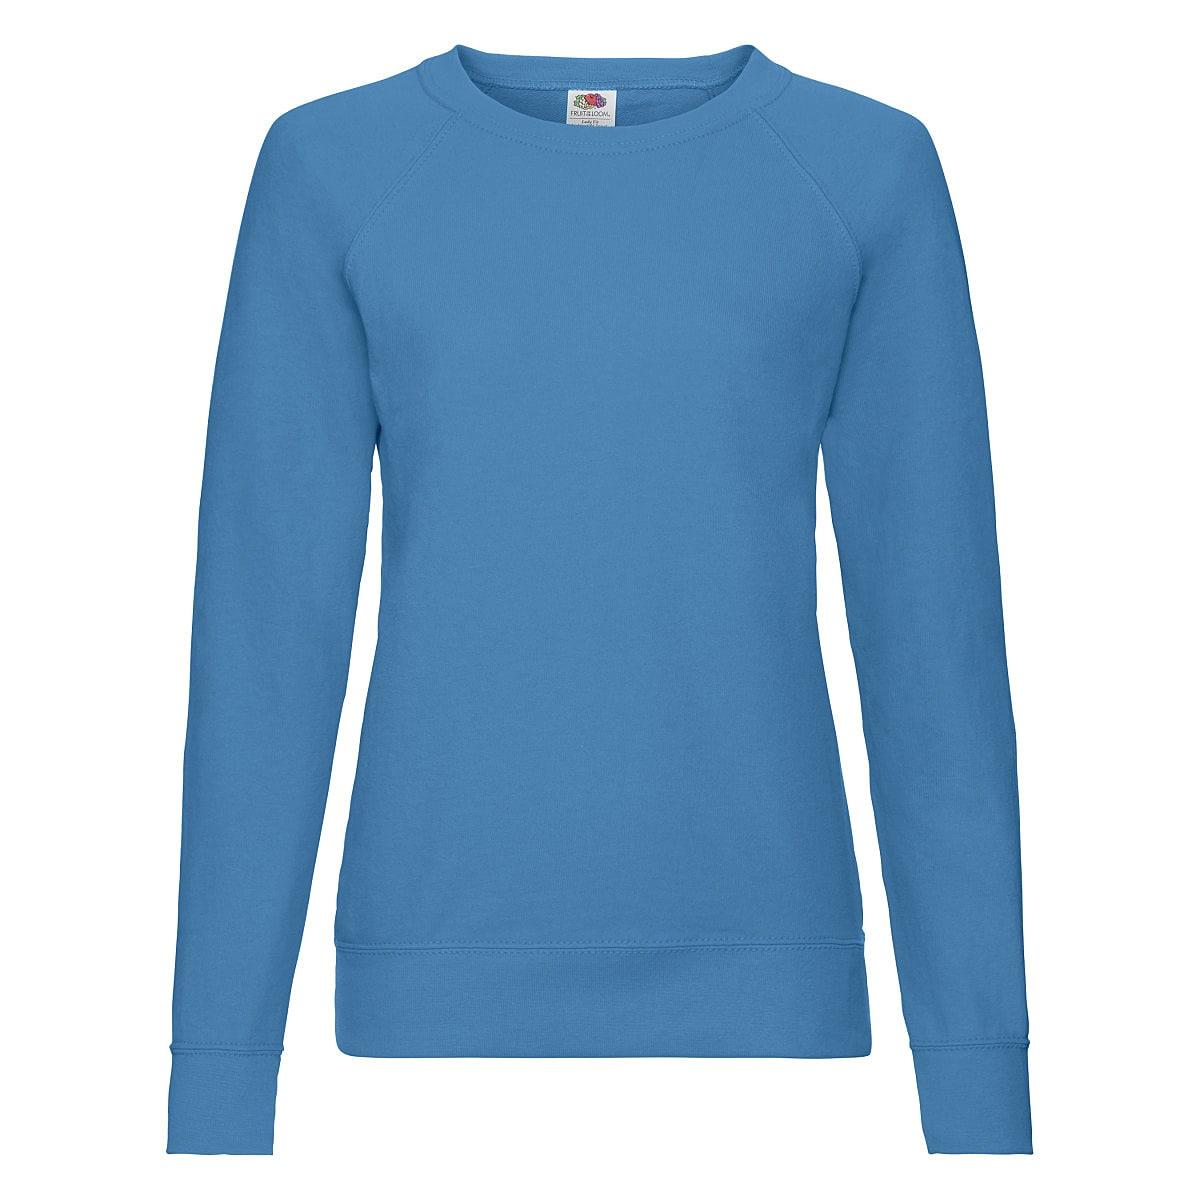 Fruit Of The Loom Lady-Fit Lightweight Raglan Sweater in Azure Blue (Product Code: 62146)